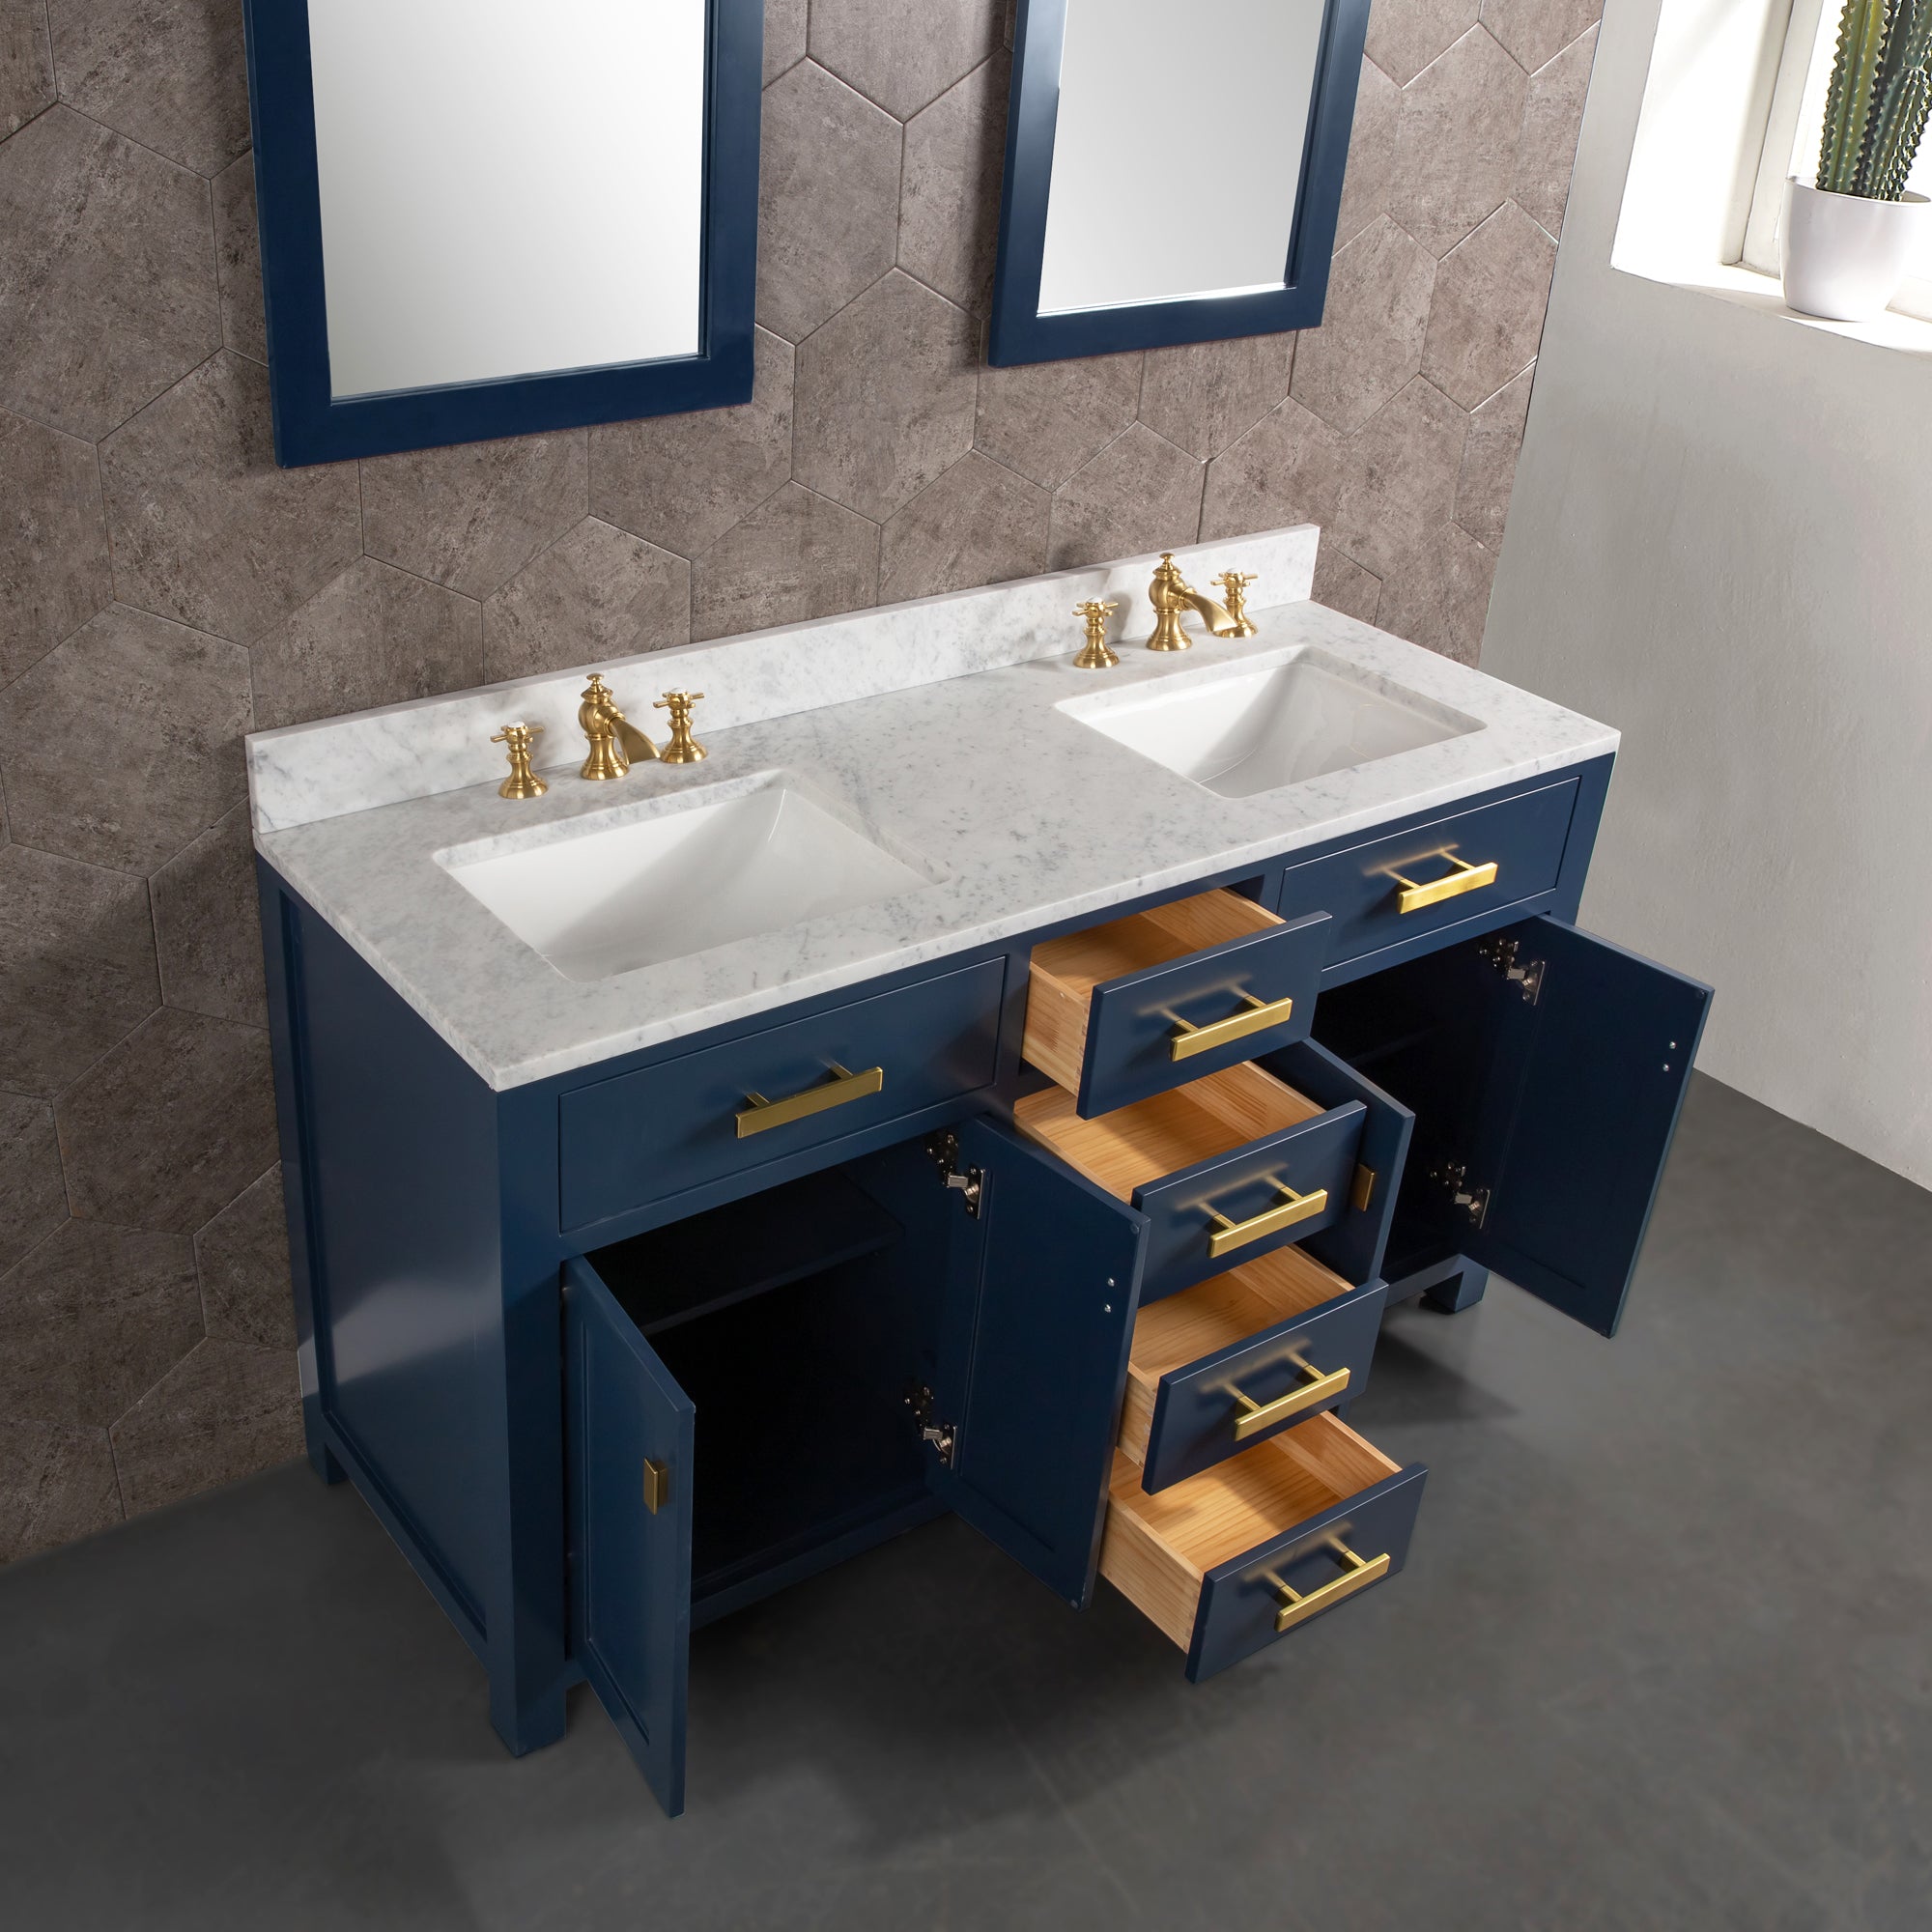 Water Creation | Madison 60-Inch Double Sink Carrara White Marble Vanity In Monarch BlueWith F2-0013-06-FX Lavatory Faucet(s) | MS60CW06MB-000FX1306